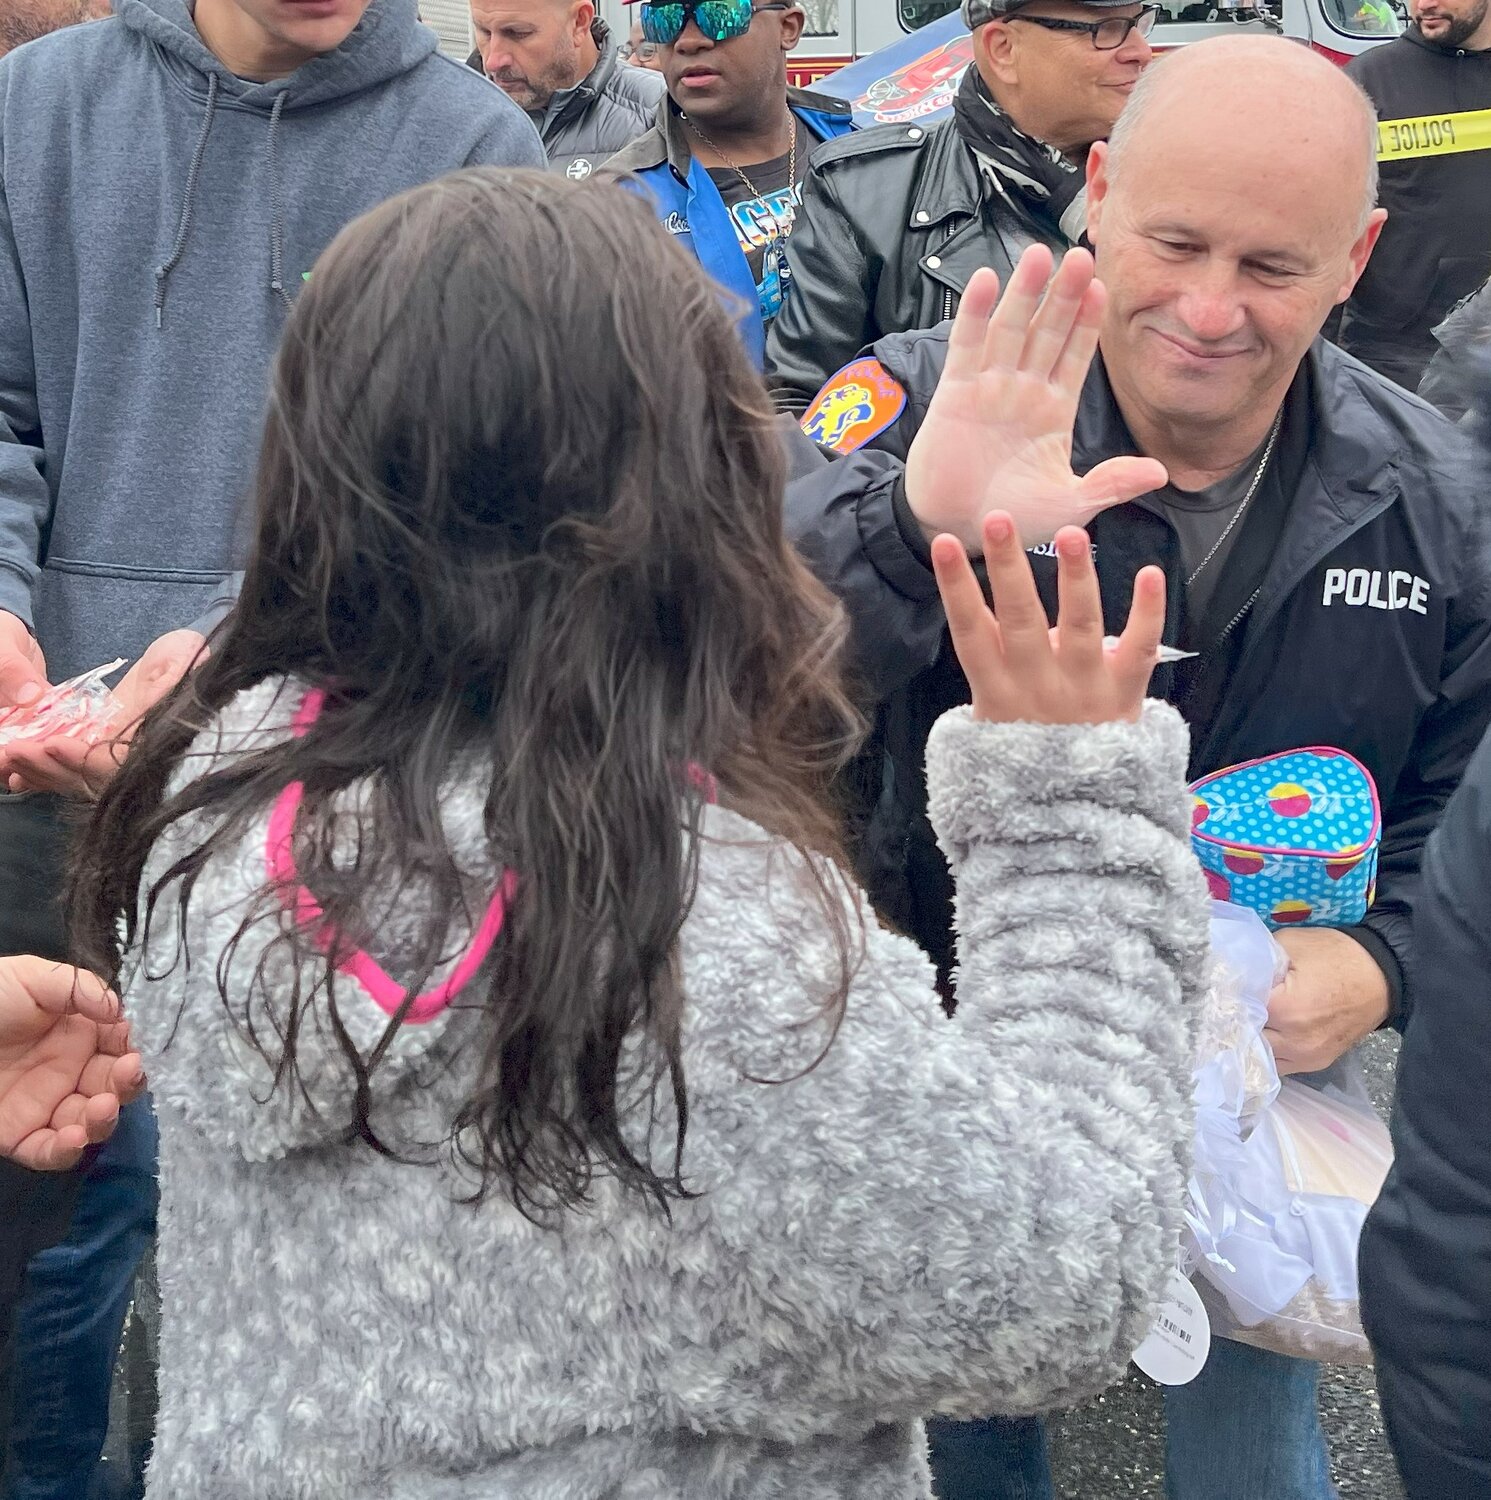 Nassau County Police Department commissioner Patrick Ryder joined the volunteers in passing out the free toys, slapping high-fives with the Uniondale youngsters who patiently waited to receive gifts.